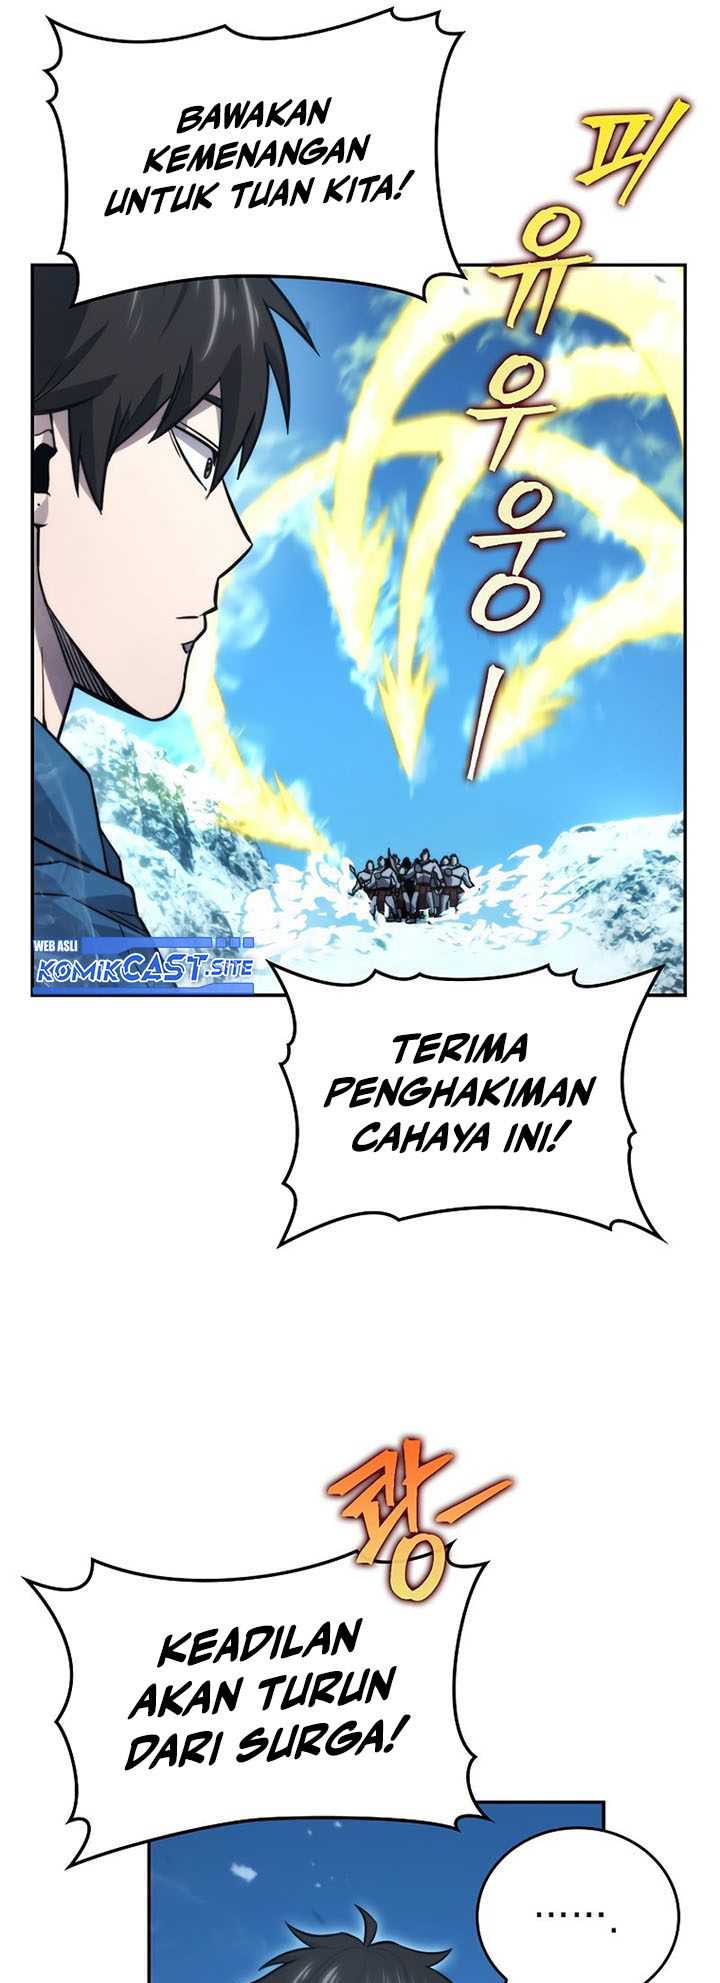 Demon Lord’s Martial Arts Ascension Chapter 41 fix